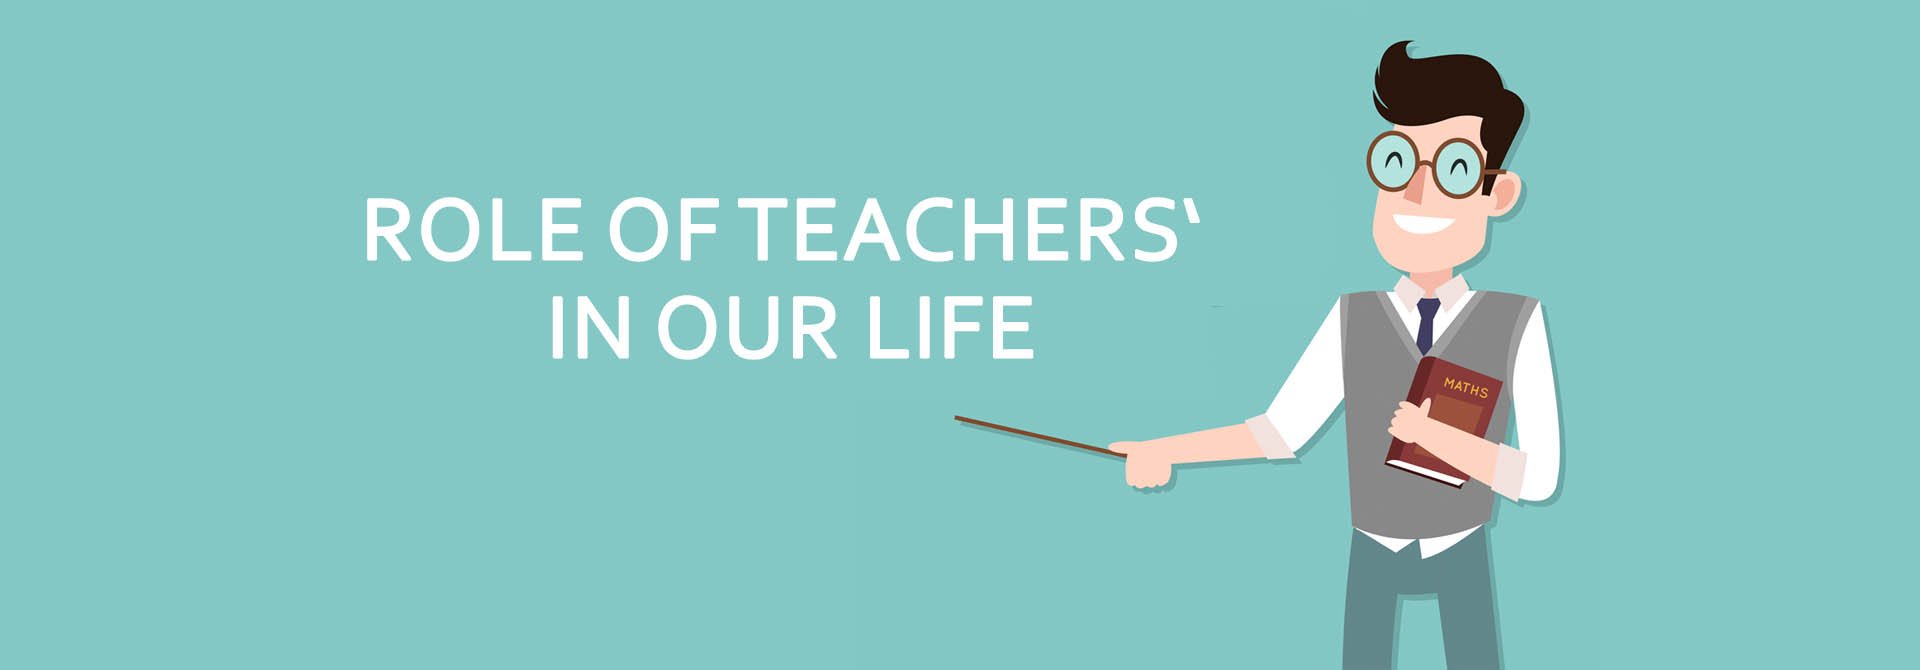 role-of-teachers-in-our-life